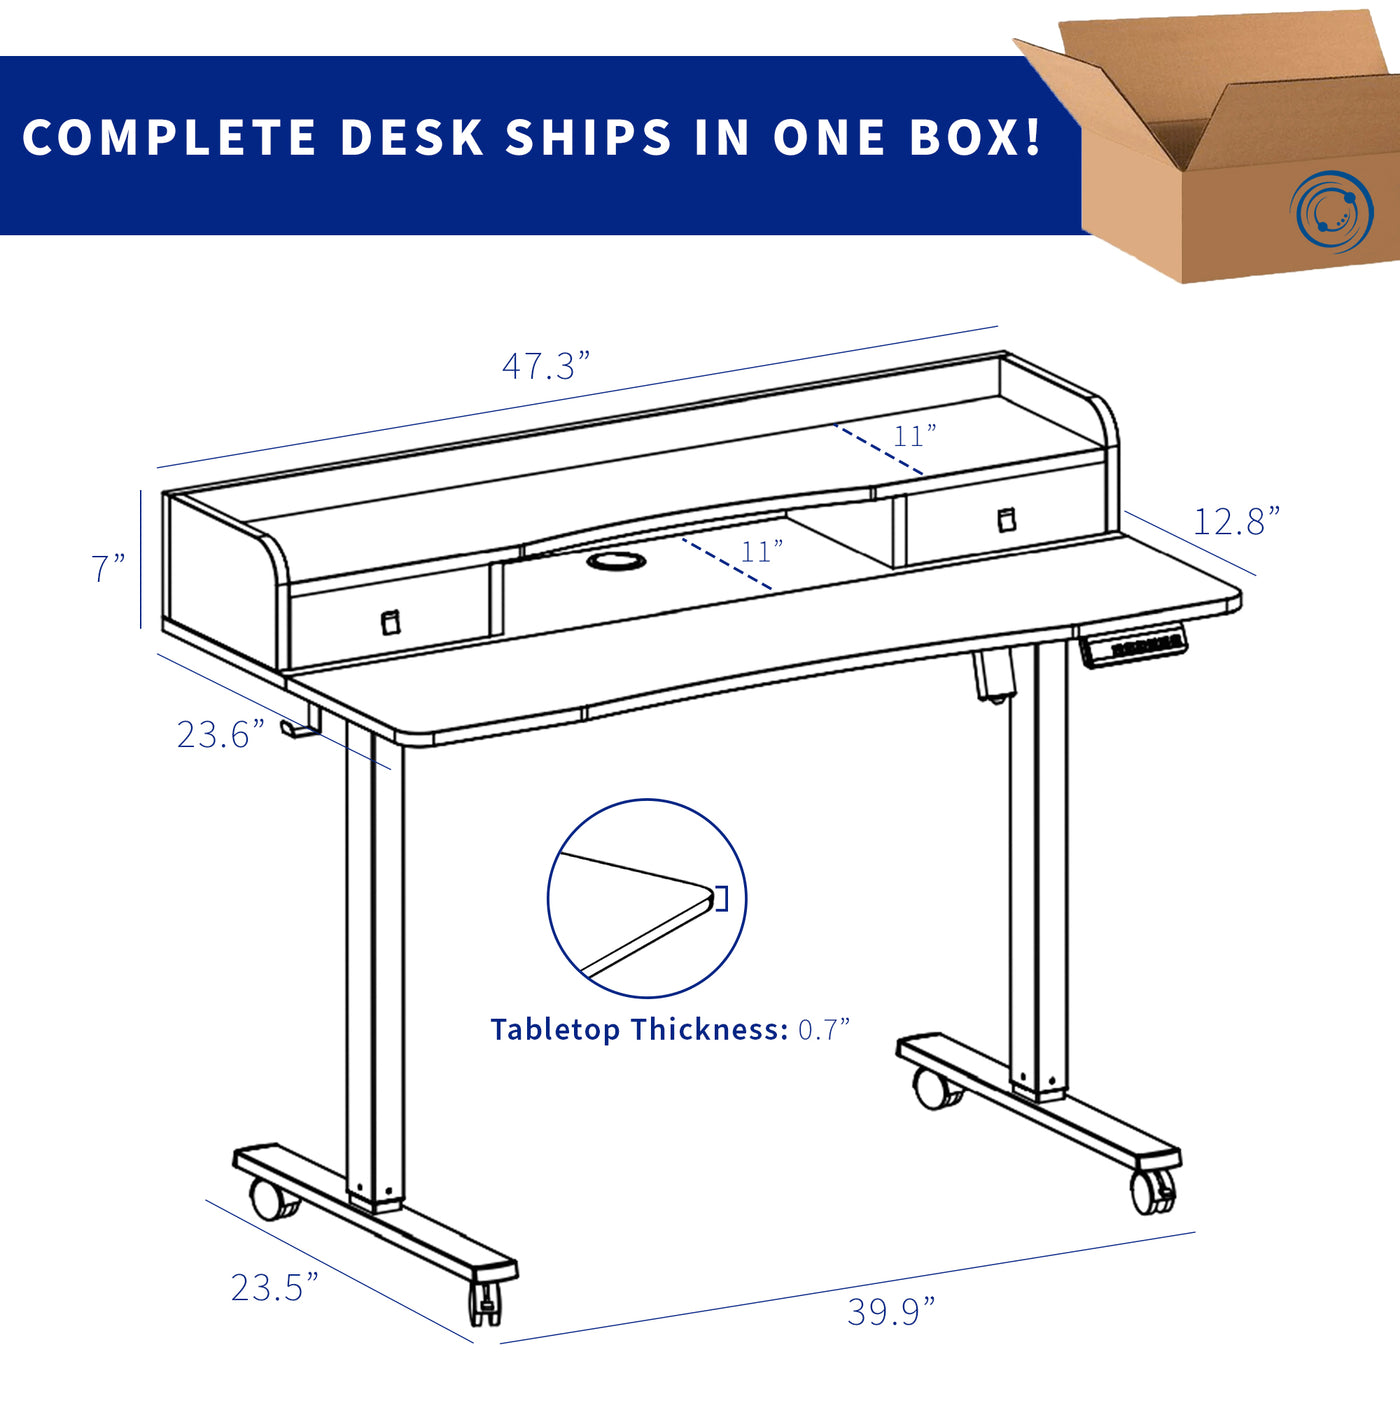 Desk ships in one box with minimal assembly required to attain an ergonomic work environment in no time.